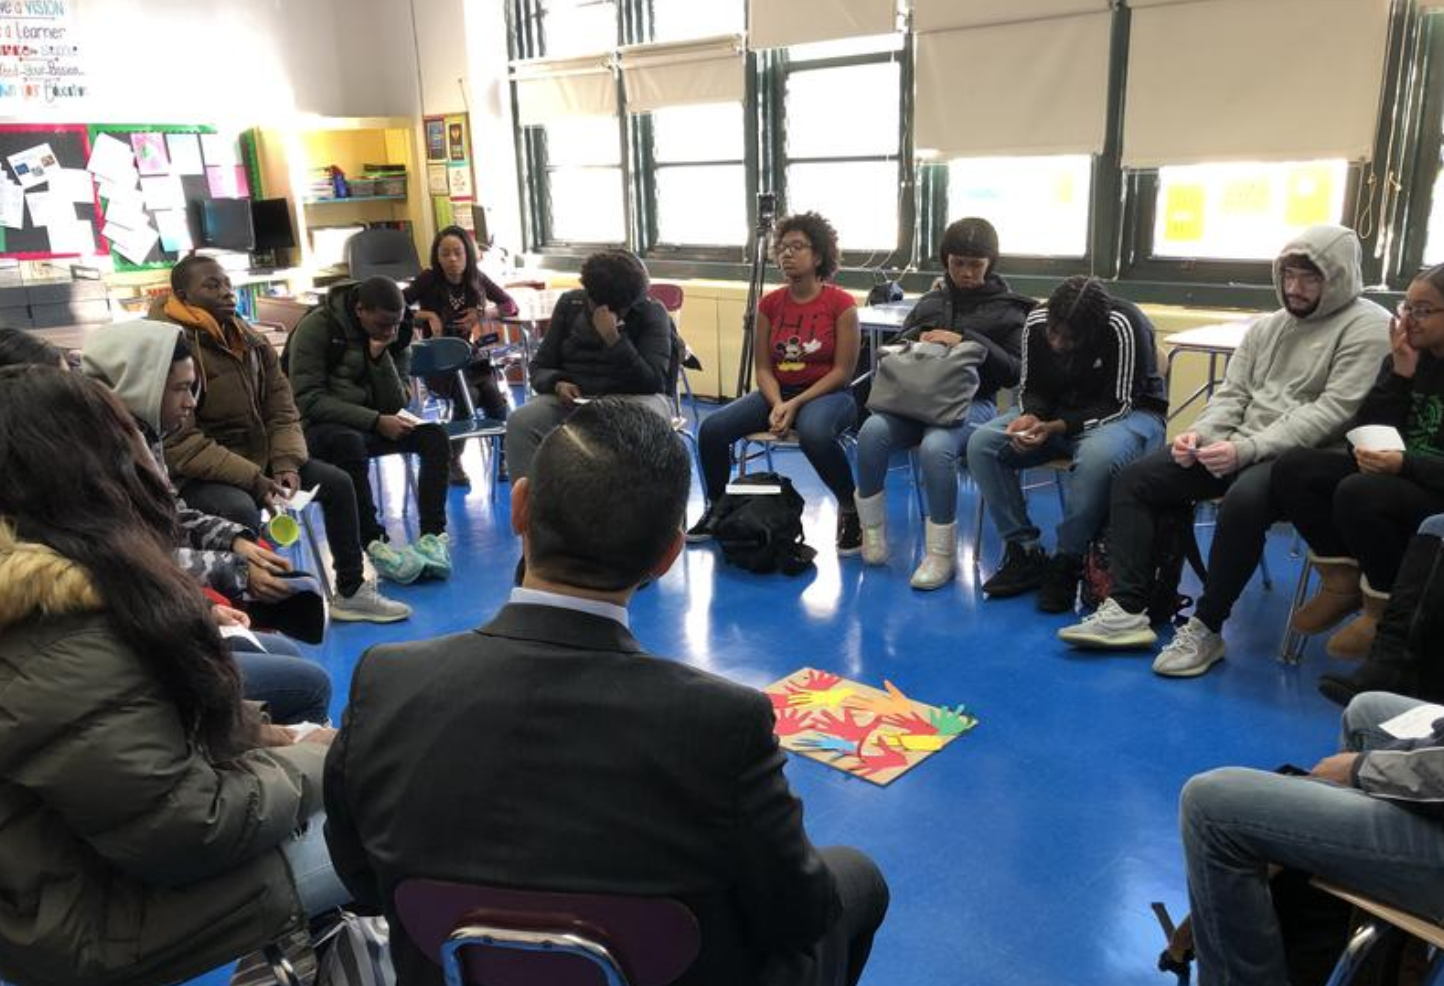 Students at the Brooklyn Academy of Finance in a circle